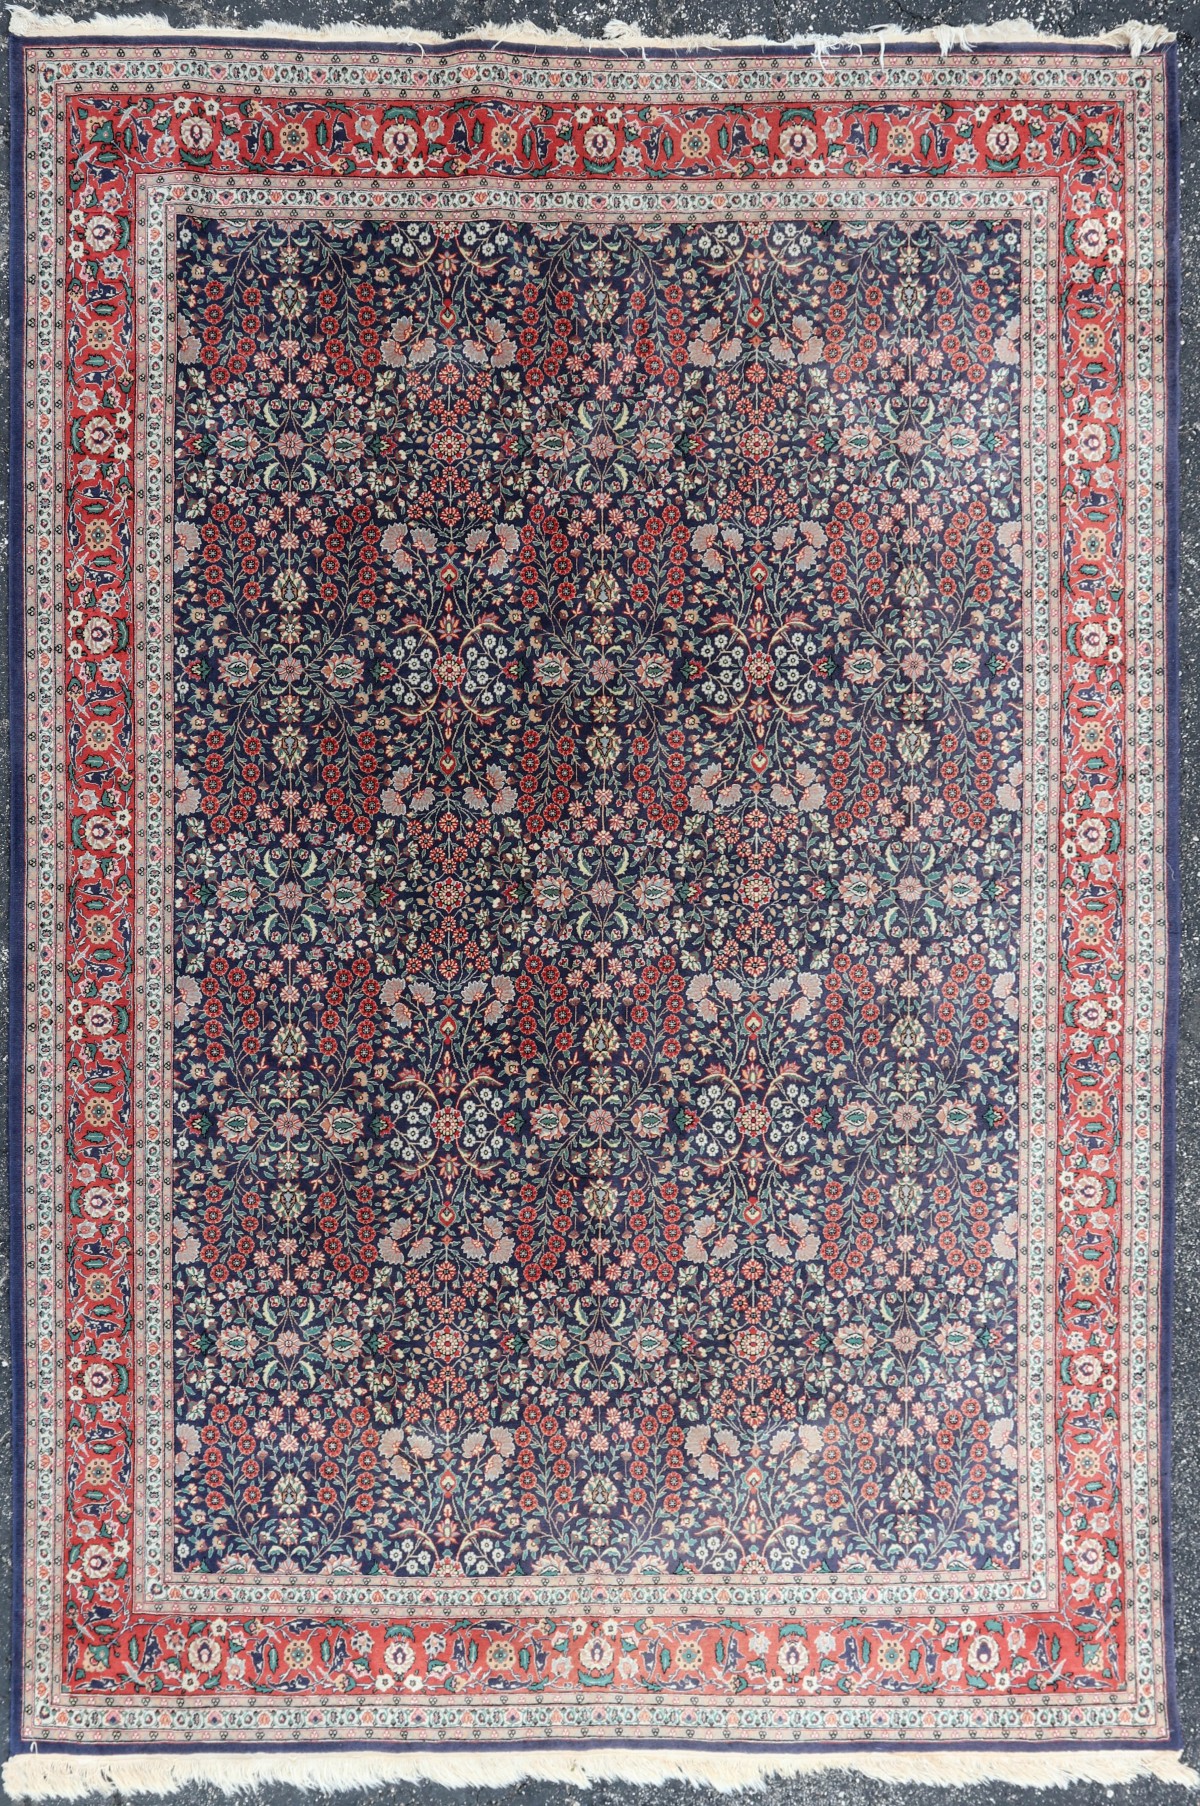 A ROOM-SIZED HAND MADE INDO PERSIAN CARPET